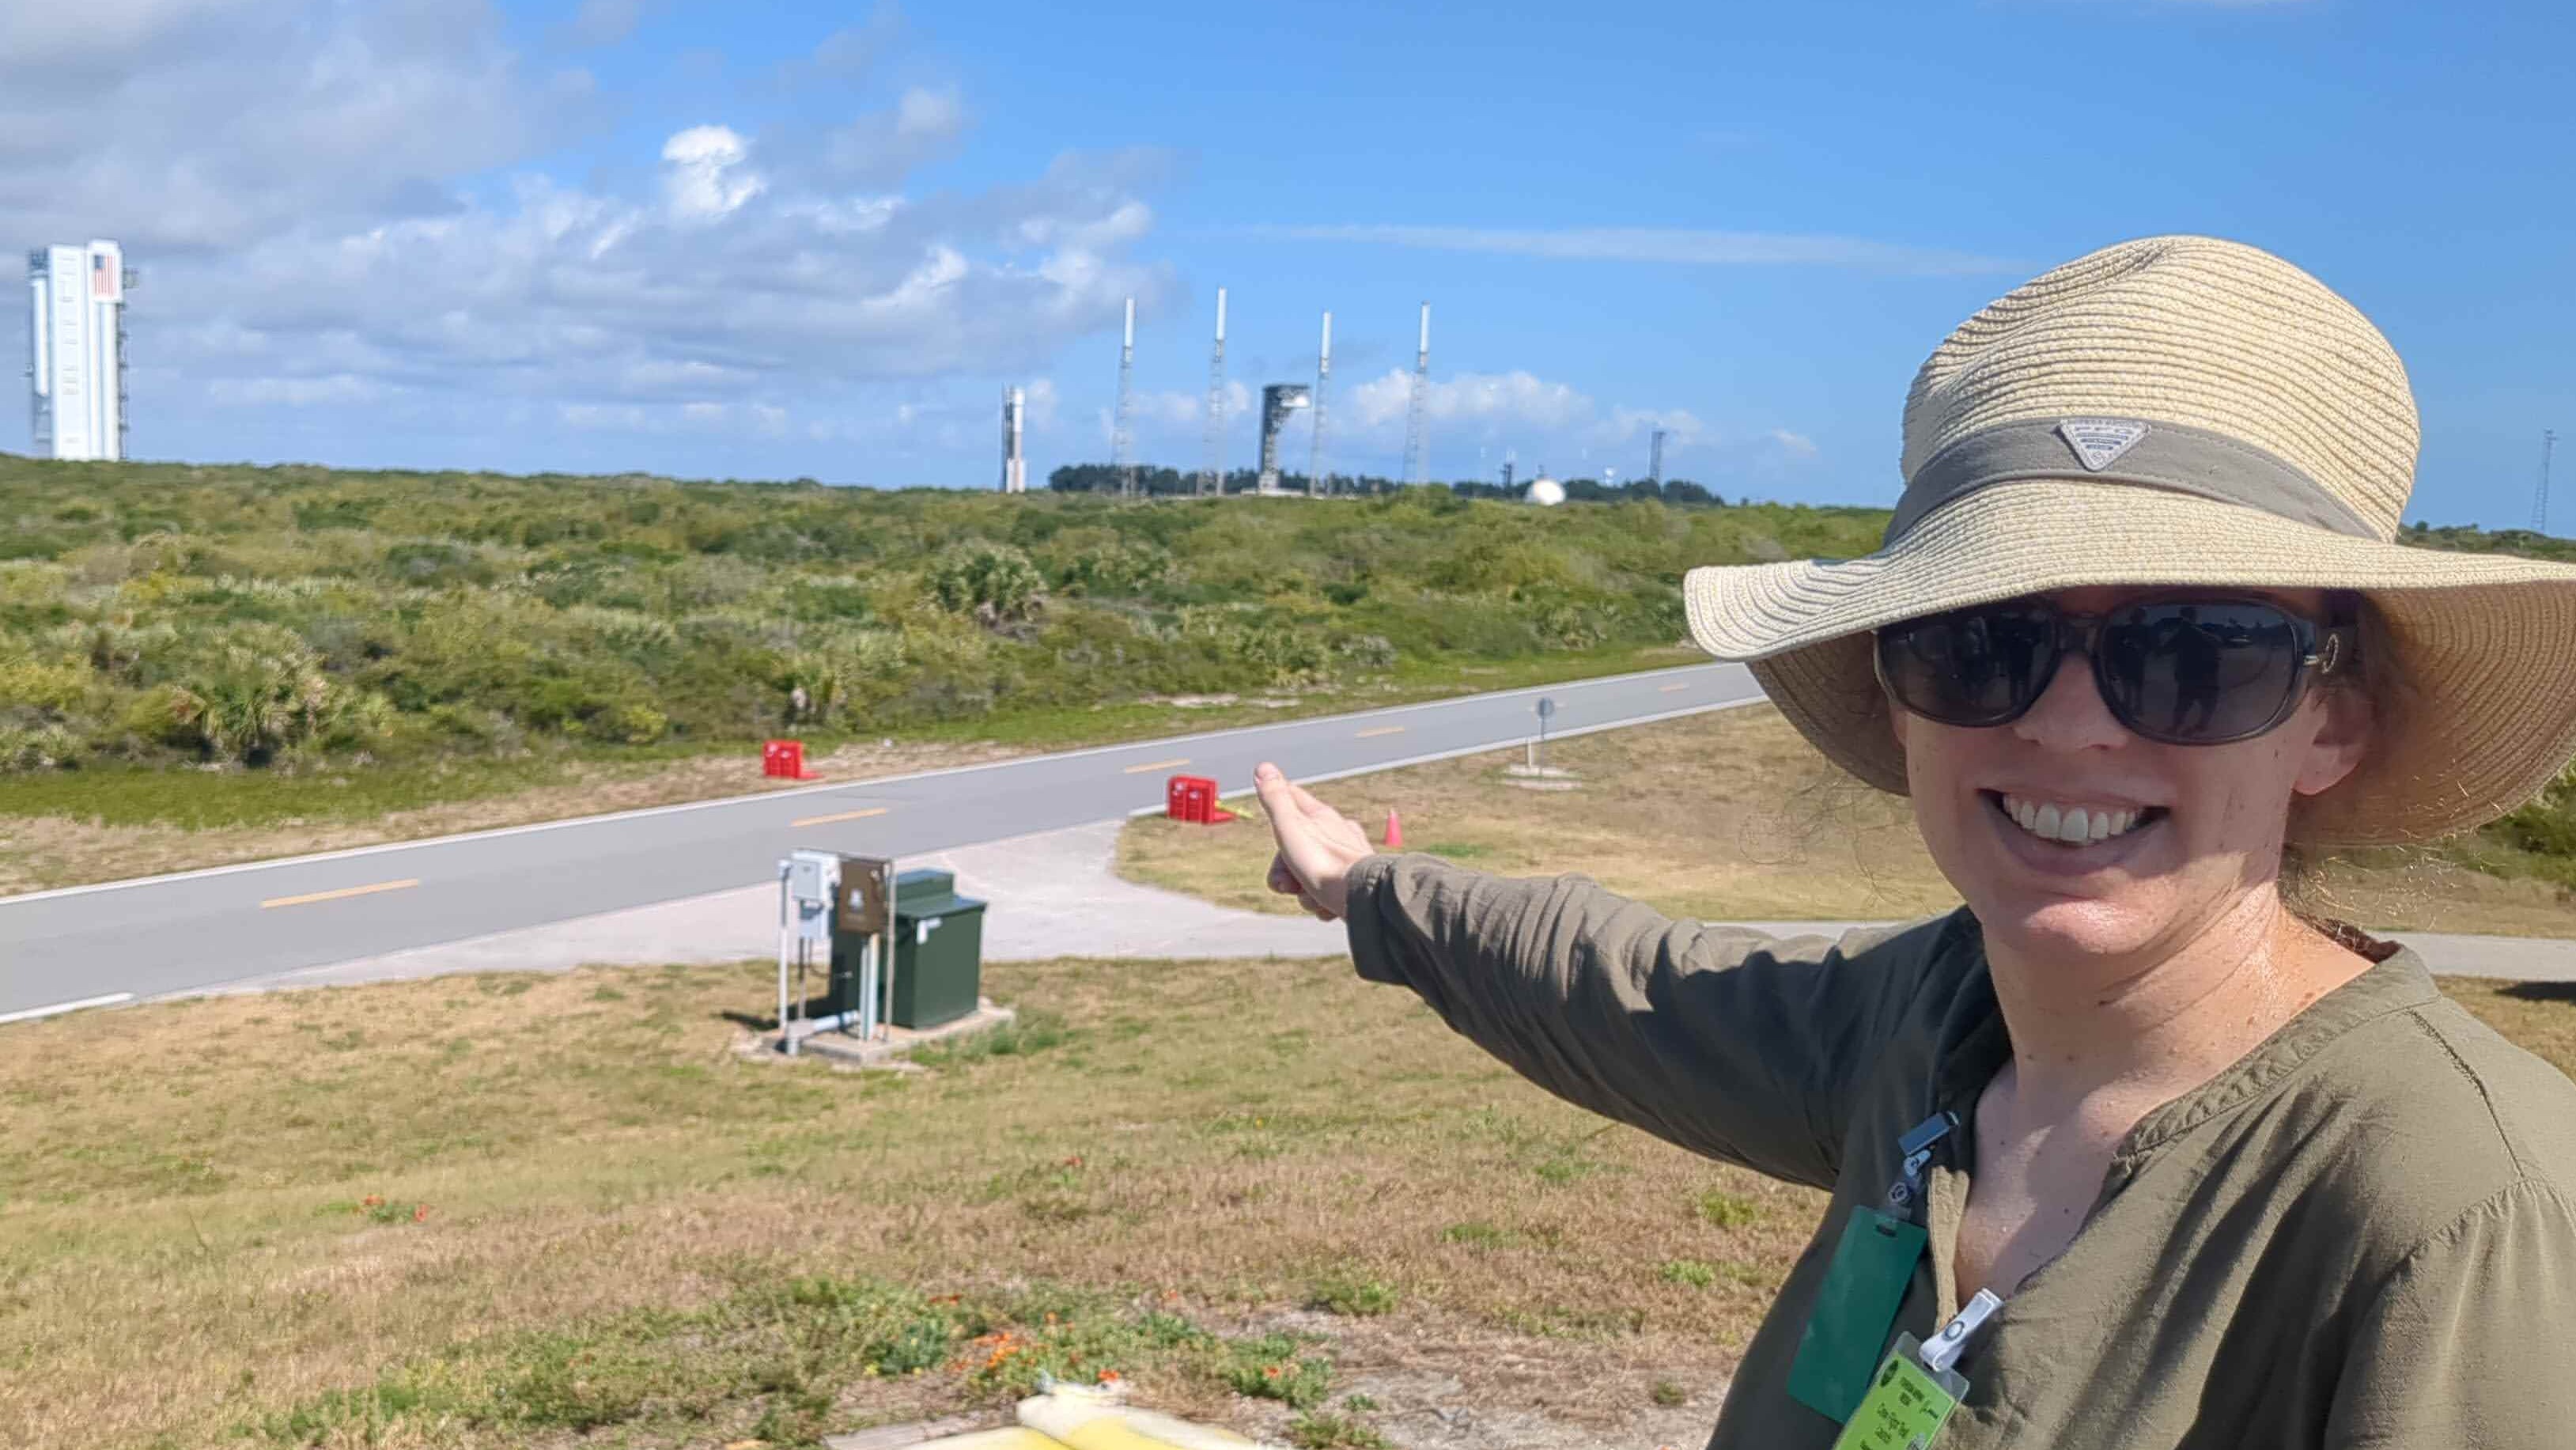 a smiling woman in a large hat and sunglasses. she points across the road to a rocket and launch pad far in the background